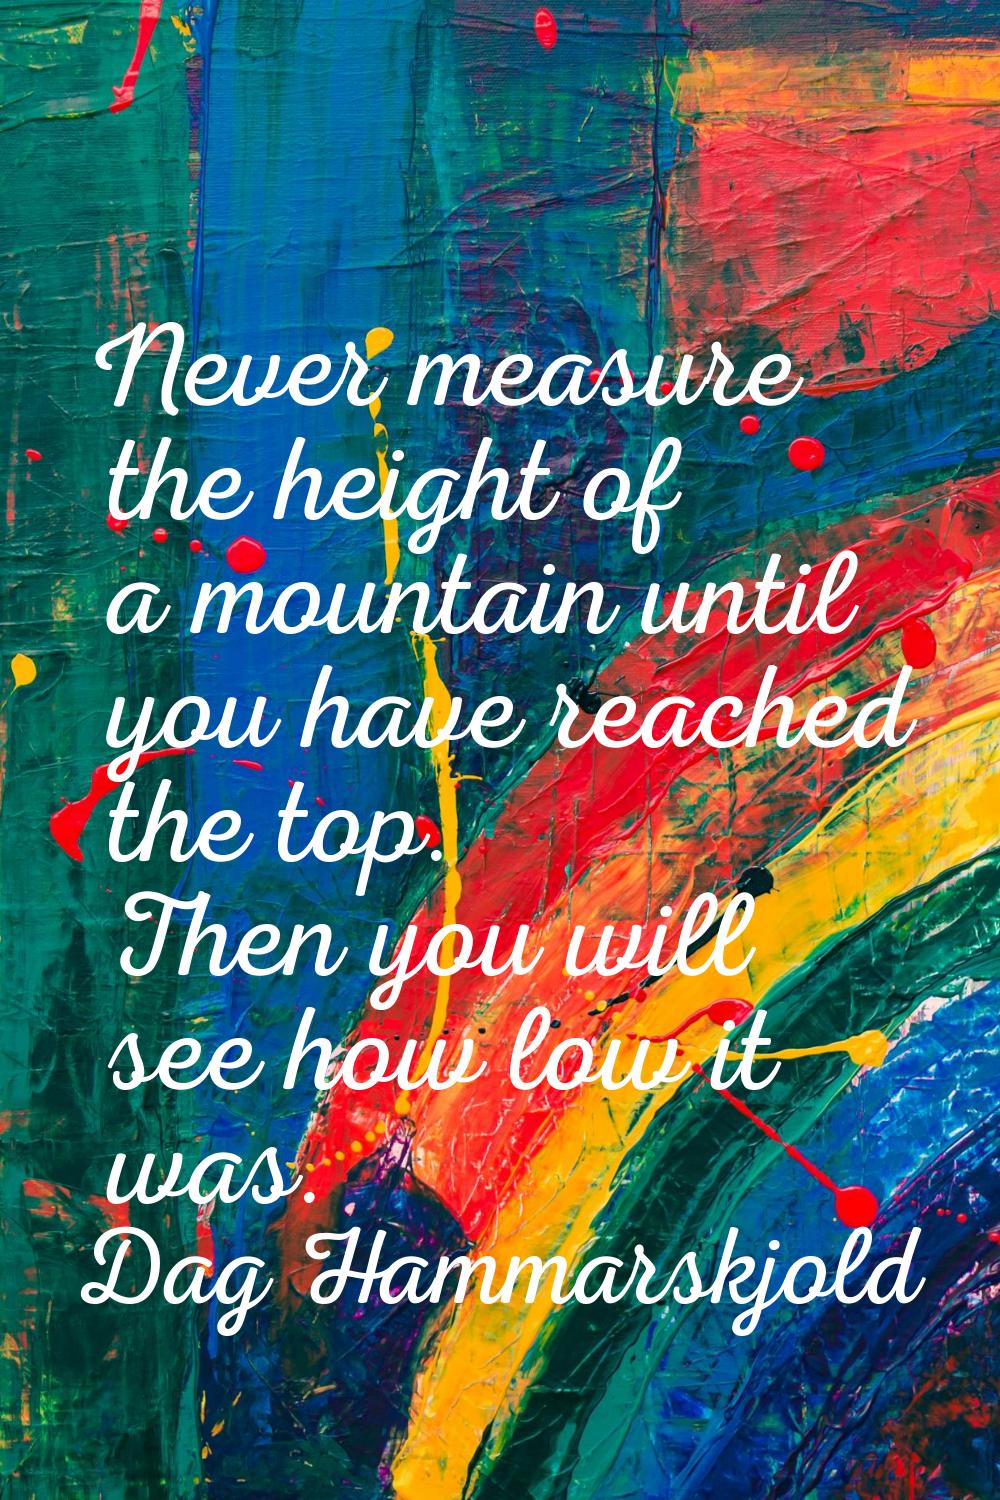 Never measure the height of a mountain until you have reached the top. Then you will see how low it